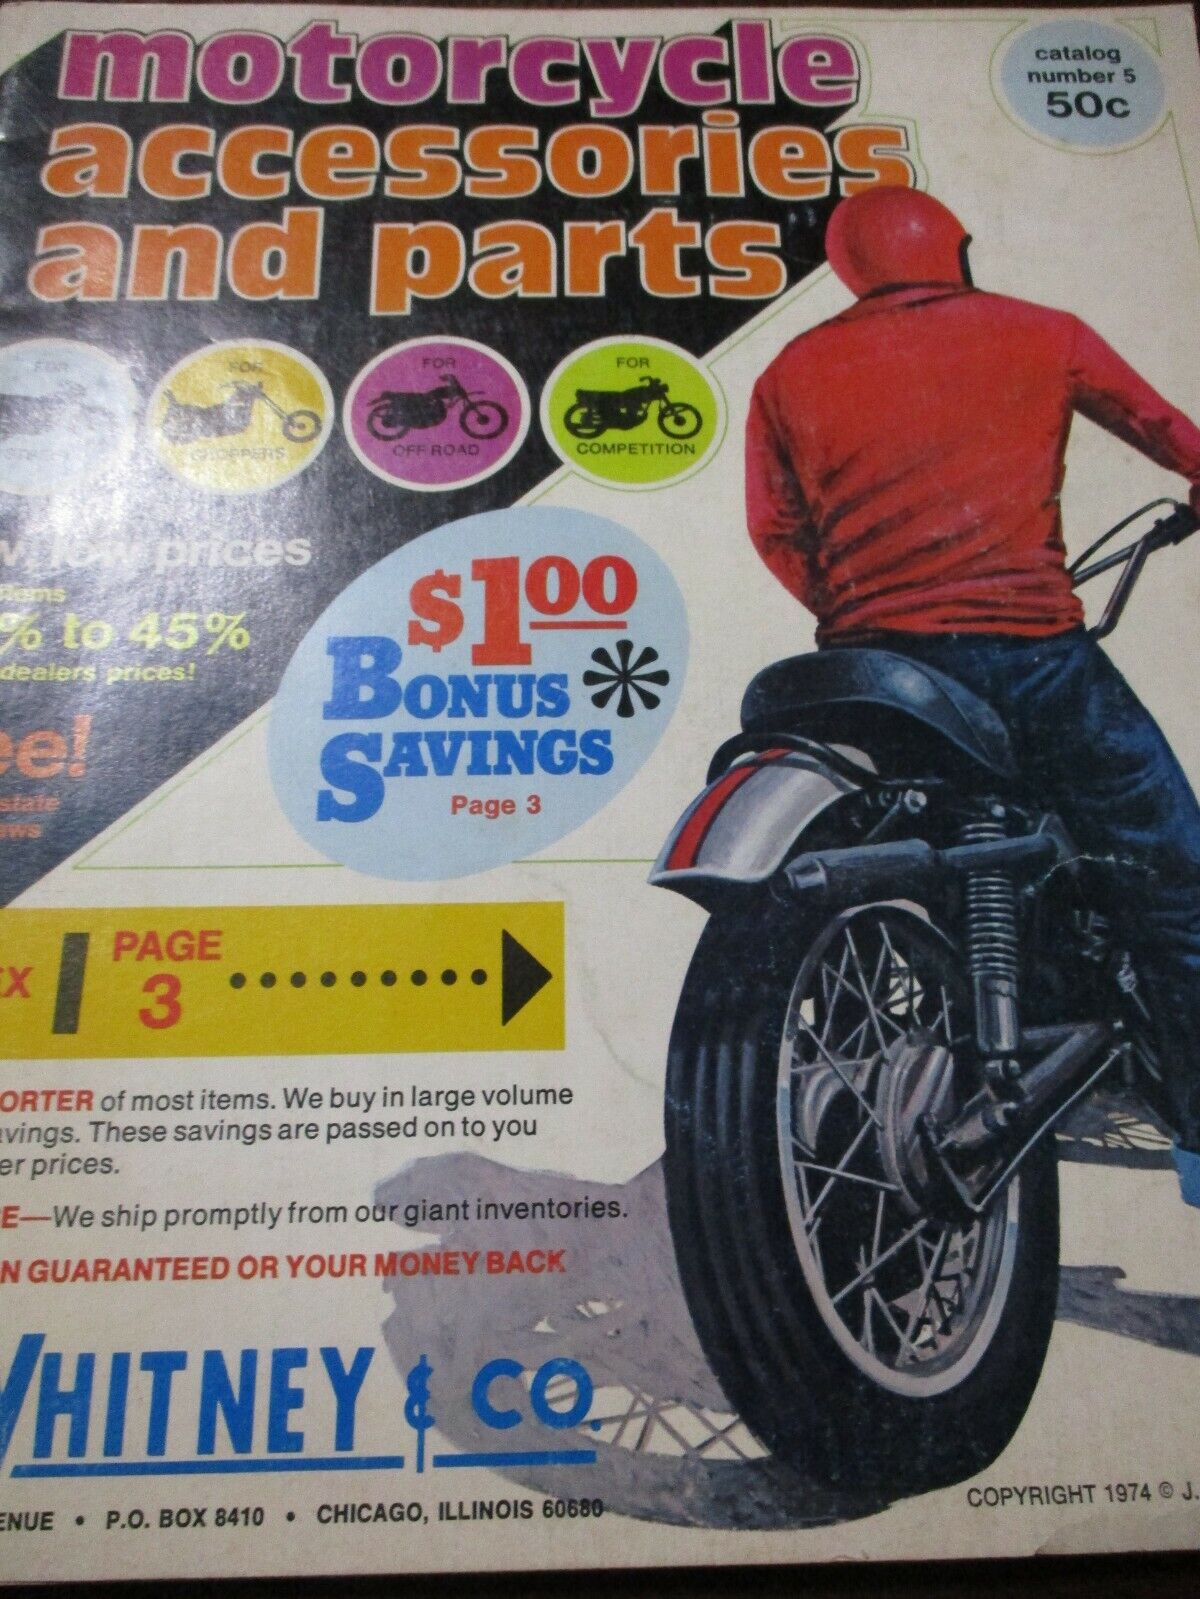 JC Whitney & Co Motorcycle Accessories & Parts Catalog 1974